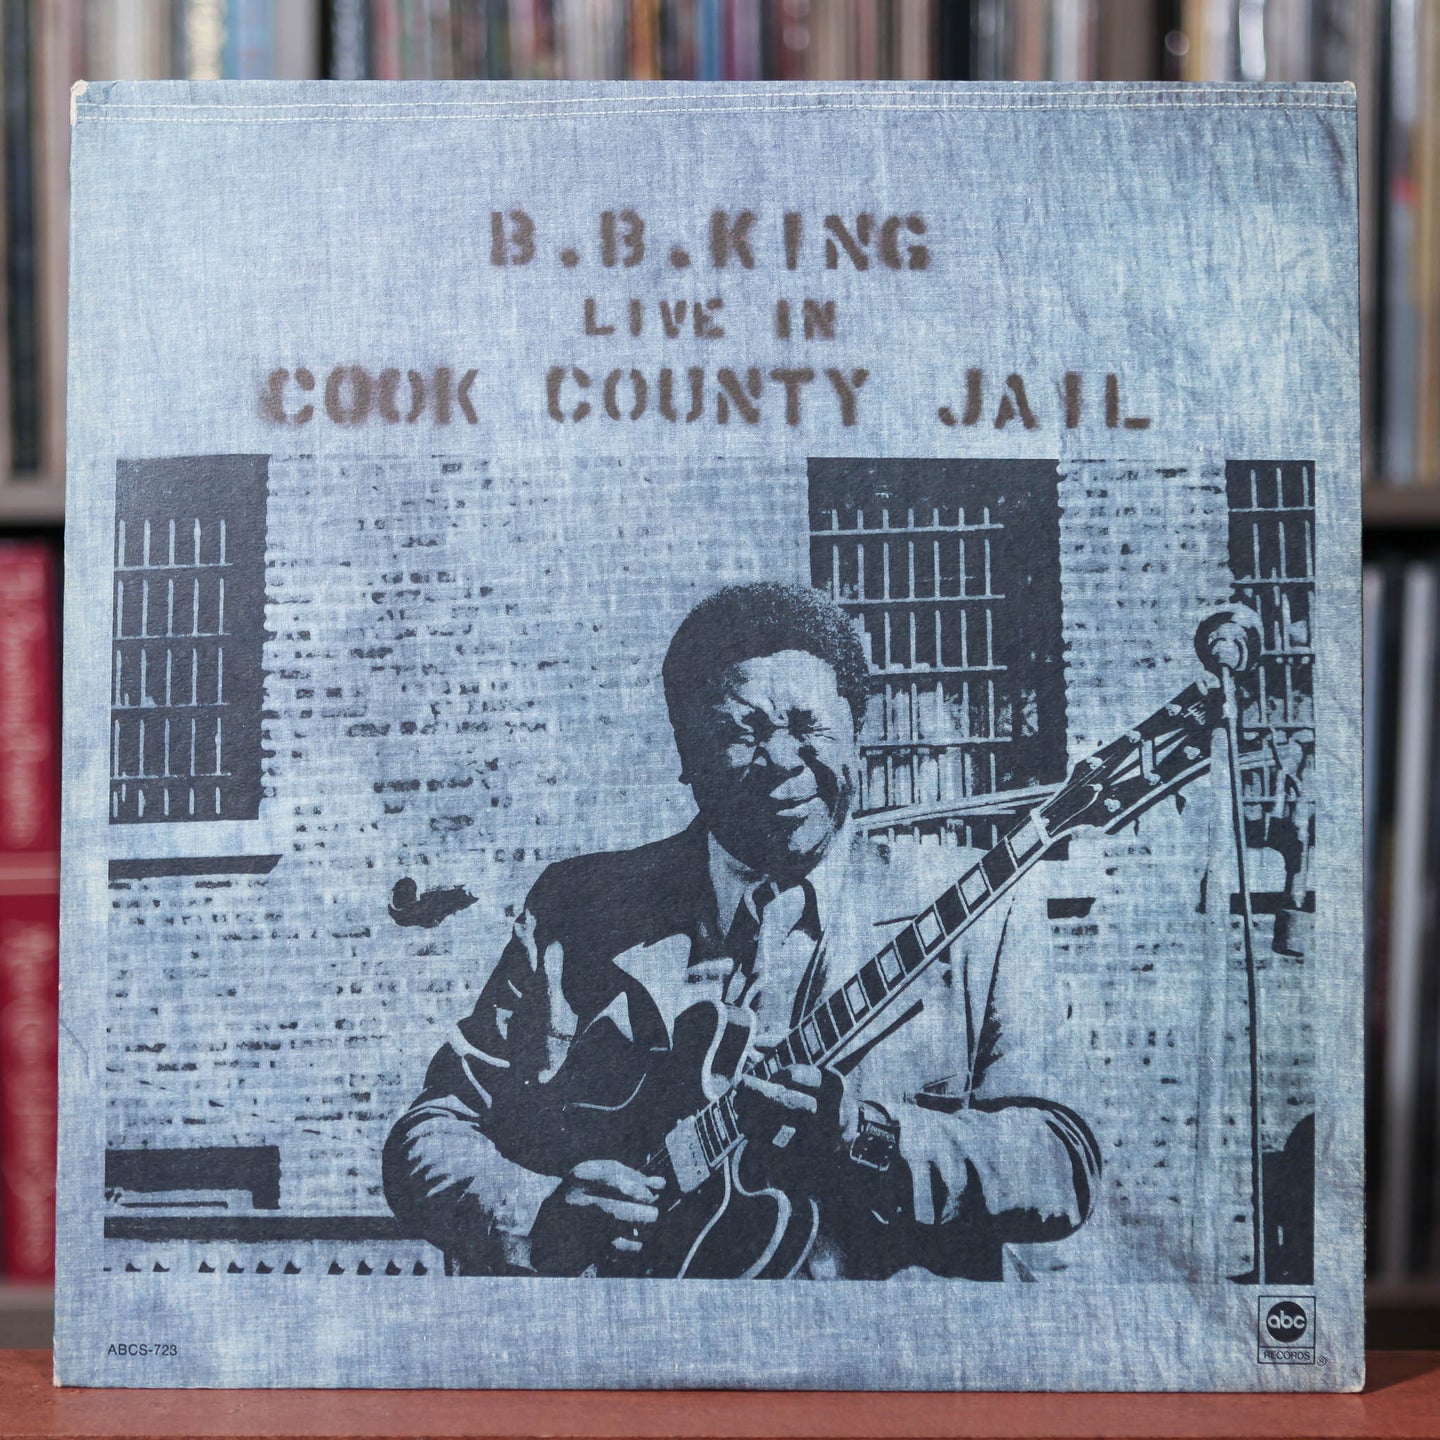 B.B. King - Live In Cook County Jail - 1971 ABC, VG+/EX